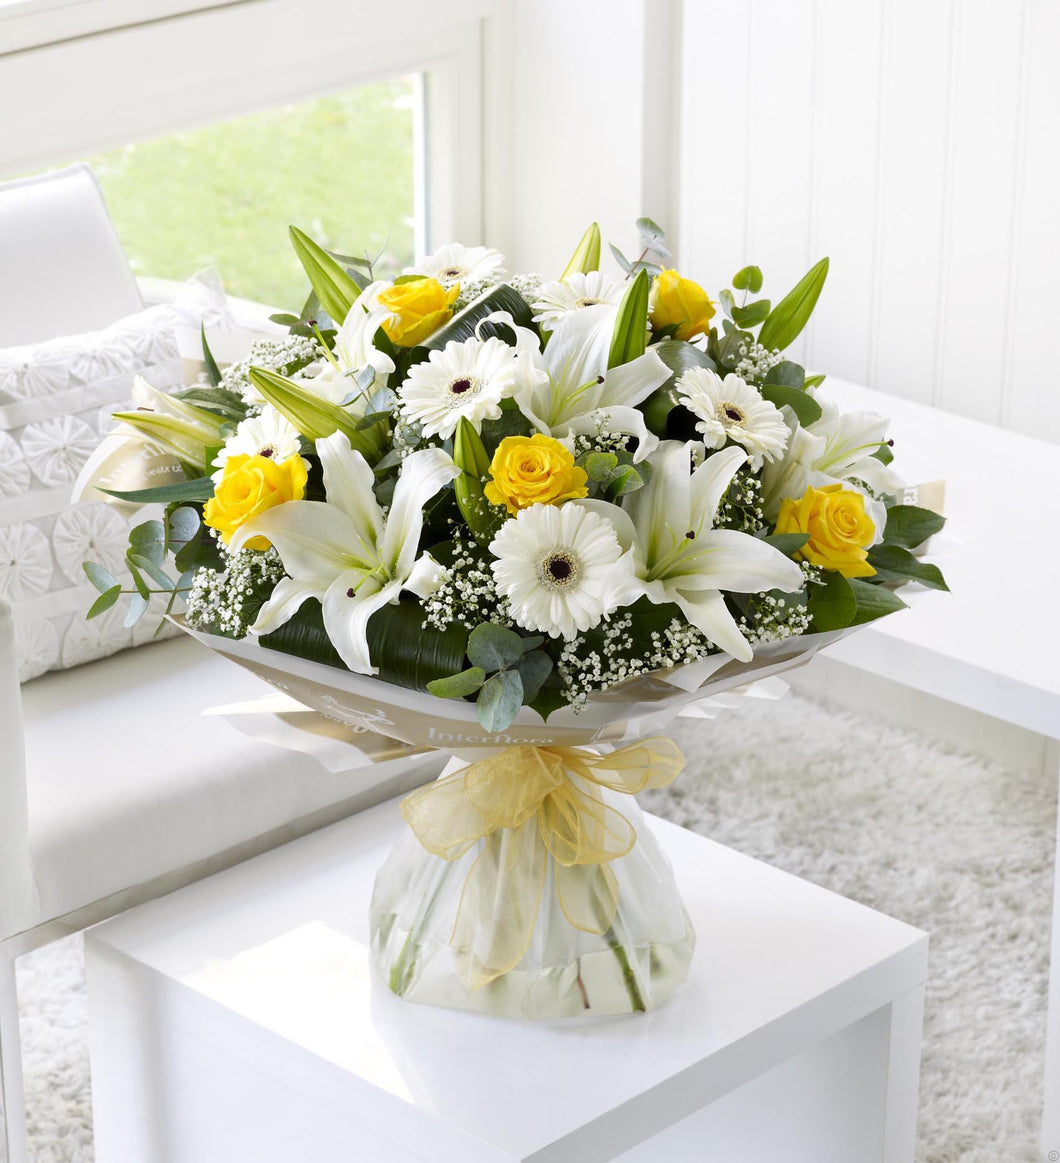 Lemon and White Sympathy Hand-tied